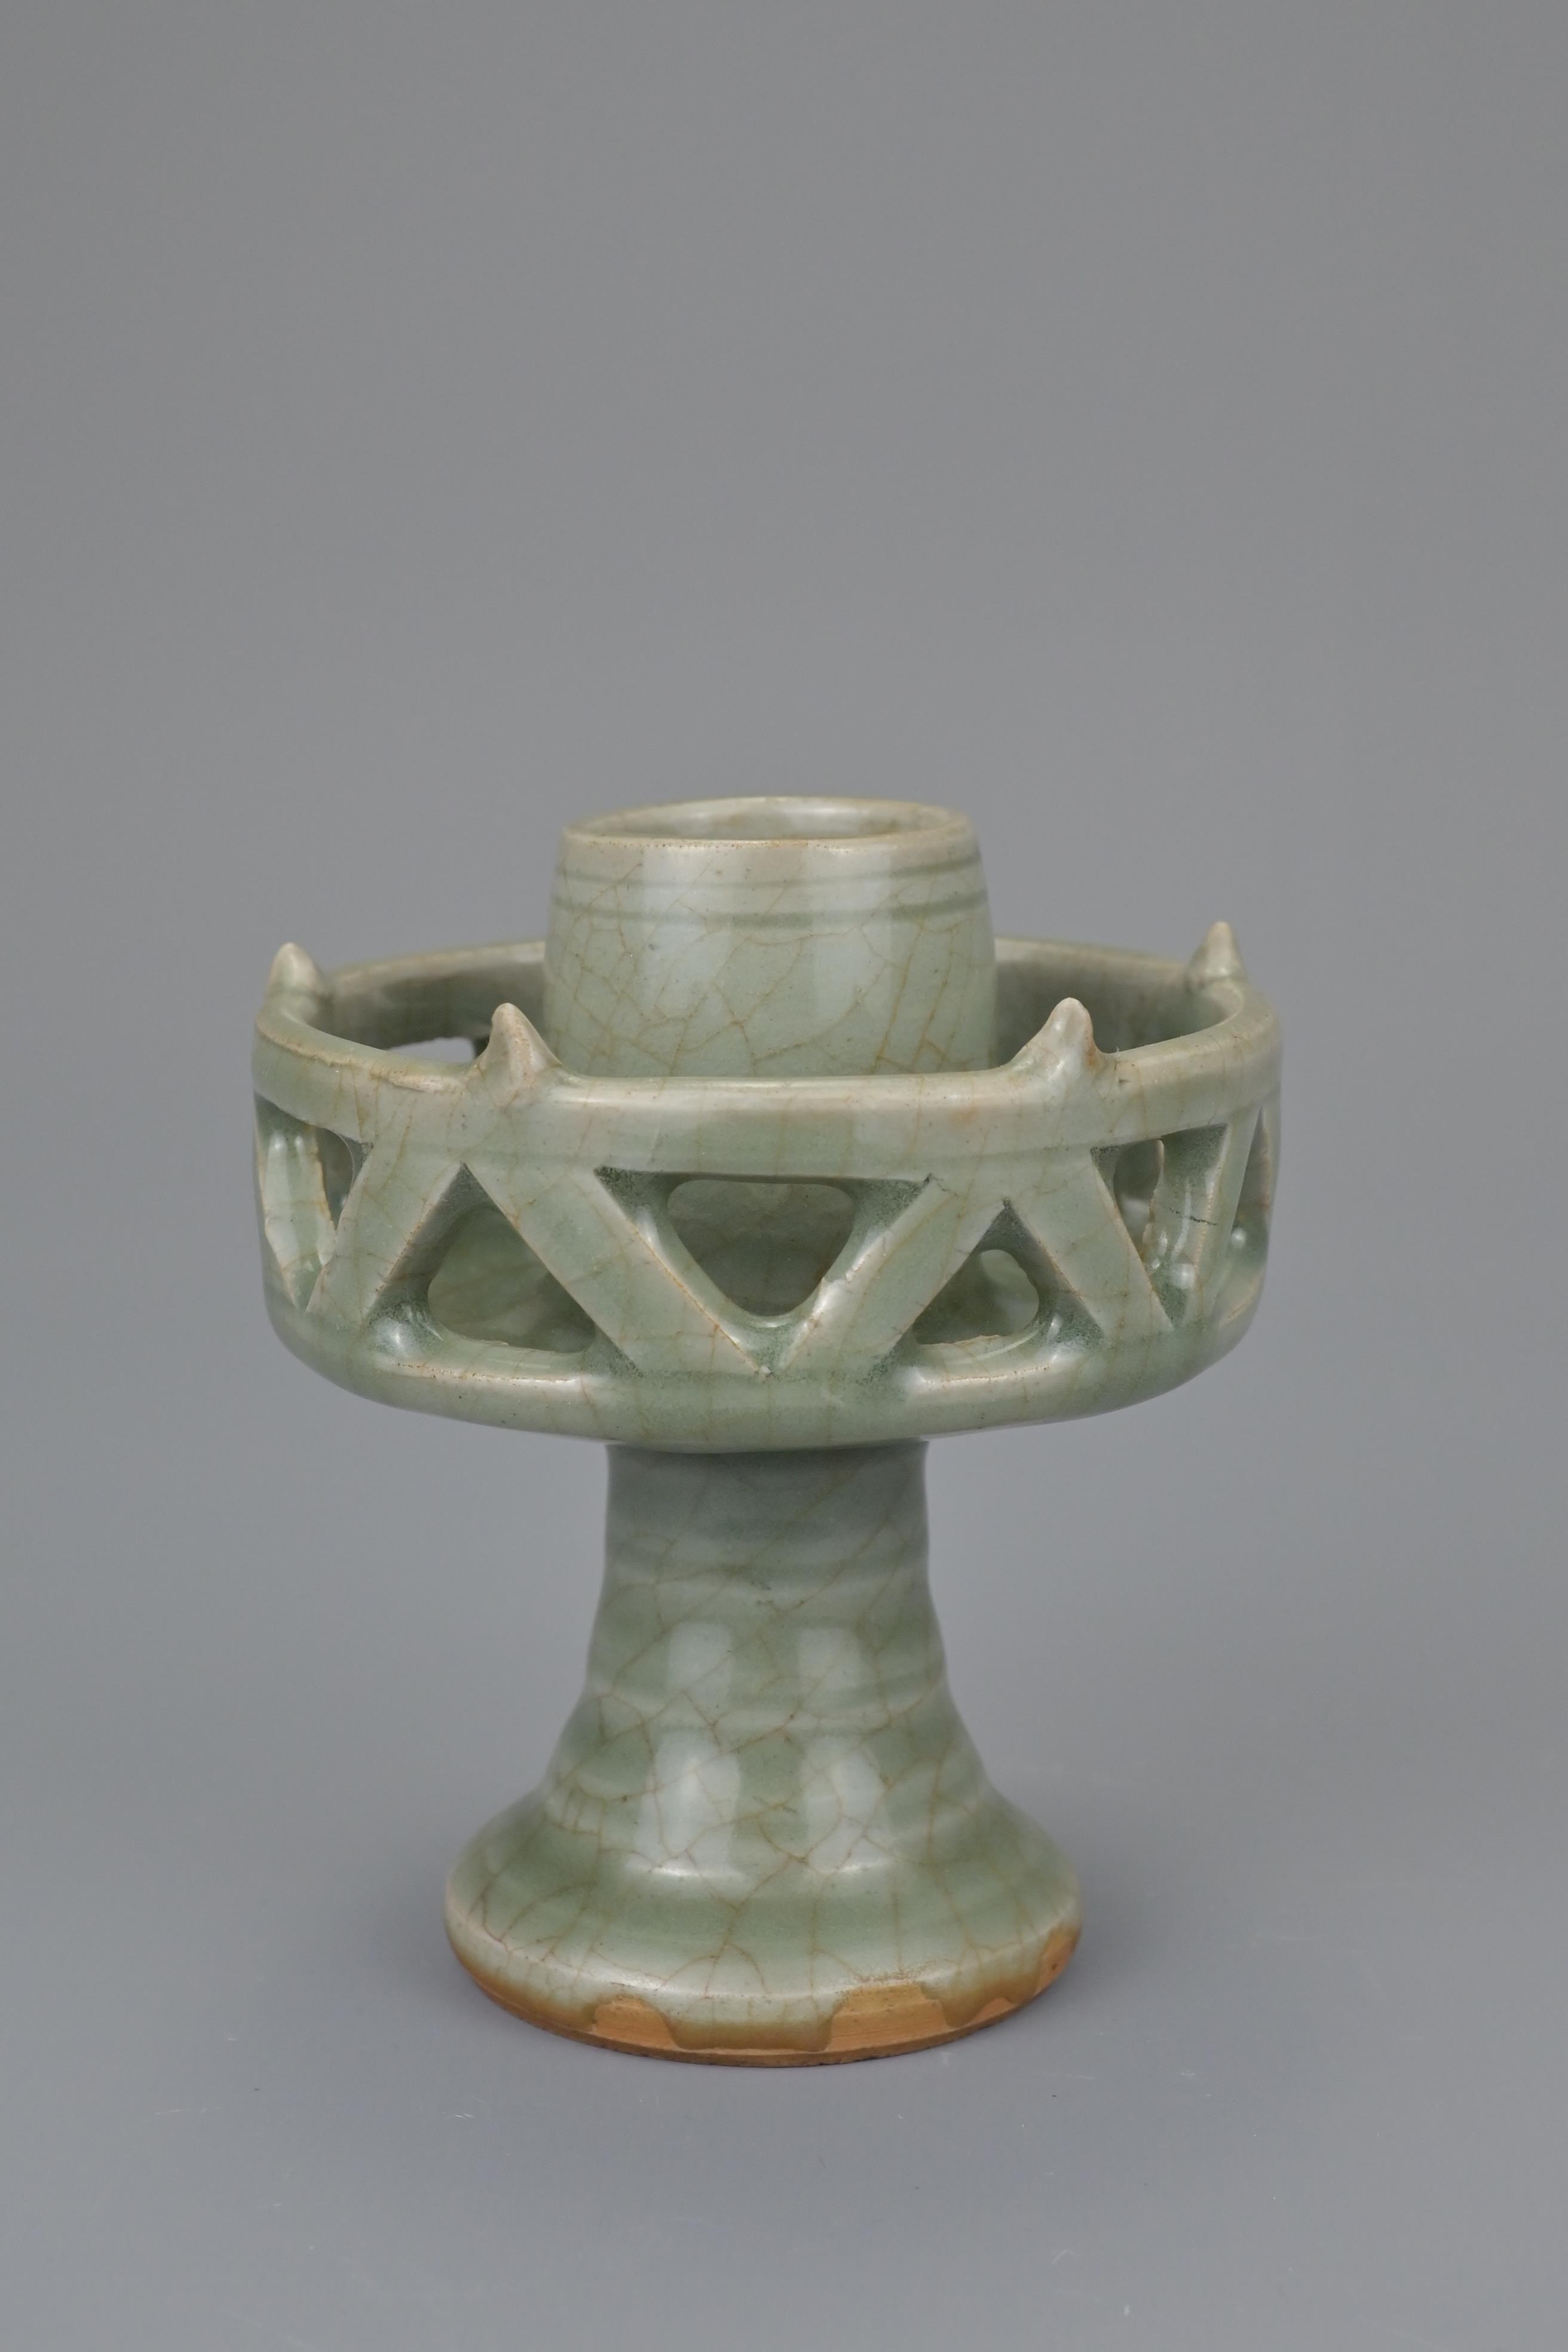 CHINESE YUAN / MING DYNASTY LONGQUAN CELADON OIL LAMP - Image 3 of 8